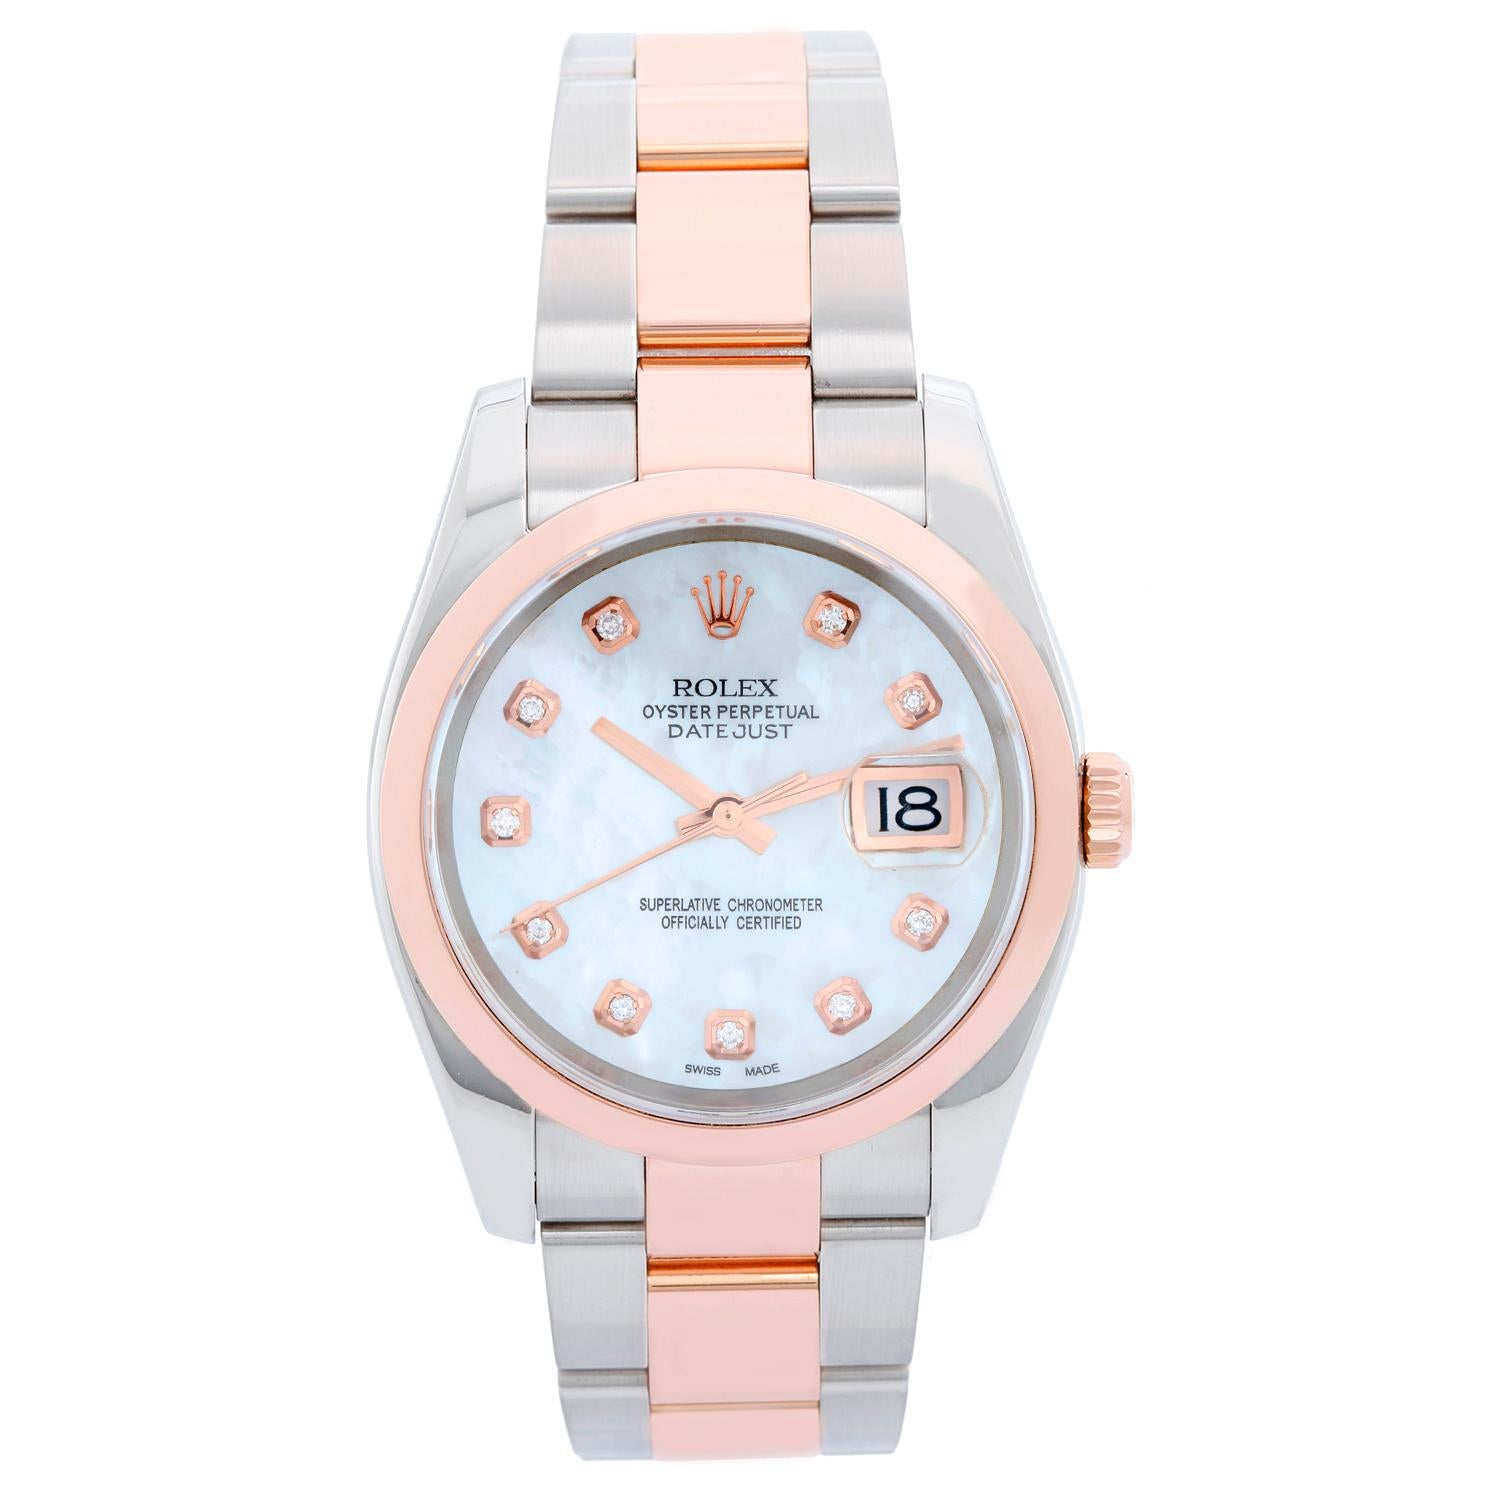 Rolex Datejust Men's Steel & Rose Gold Watch 116201 - Automatic winding, 31 jewels, Quickset, sapphire crystal. Stainless steel case with 18k rose gold smooth bezel ( 36 mm ) . Custom Mother of Pearl diamond dial . Stainless steel and 18k rose gold